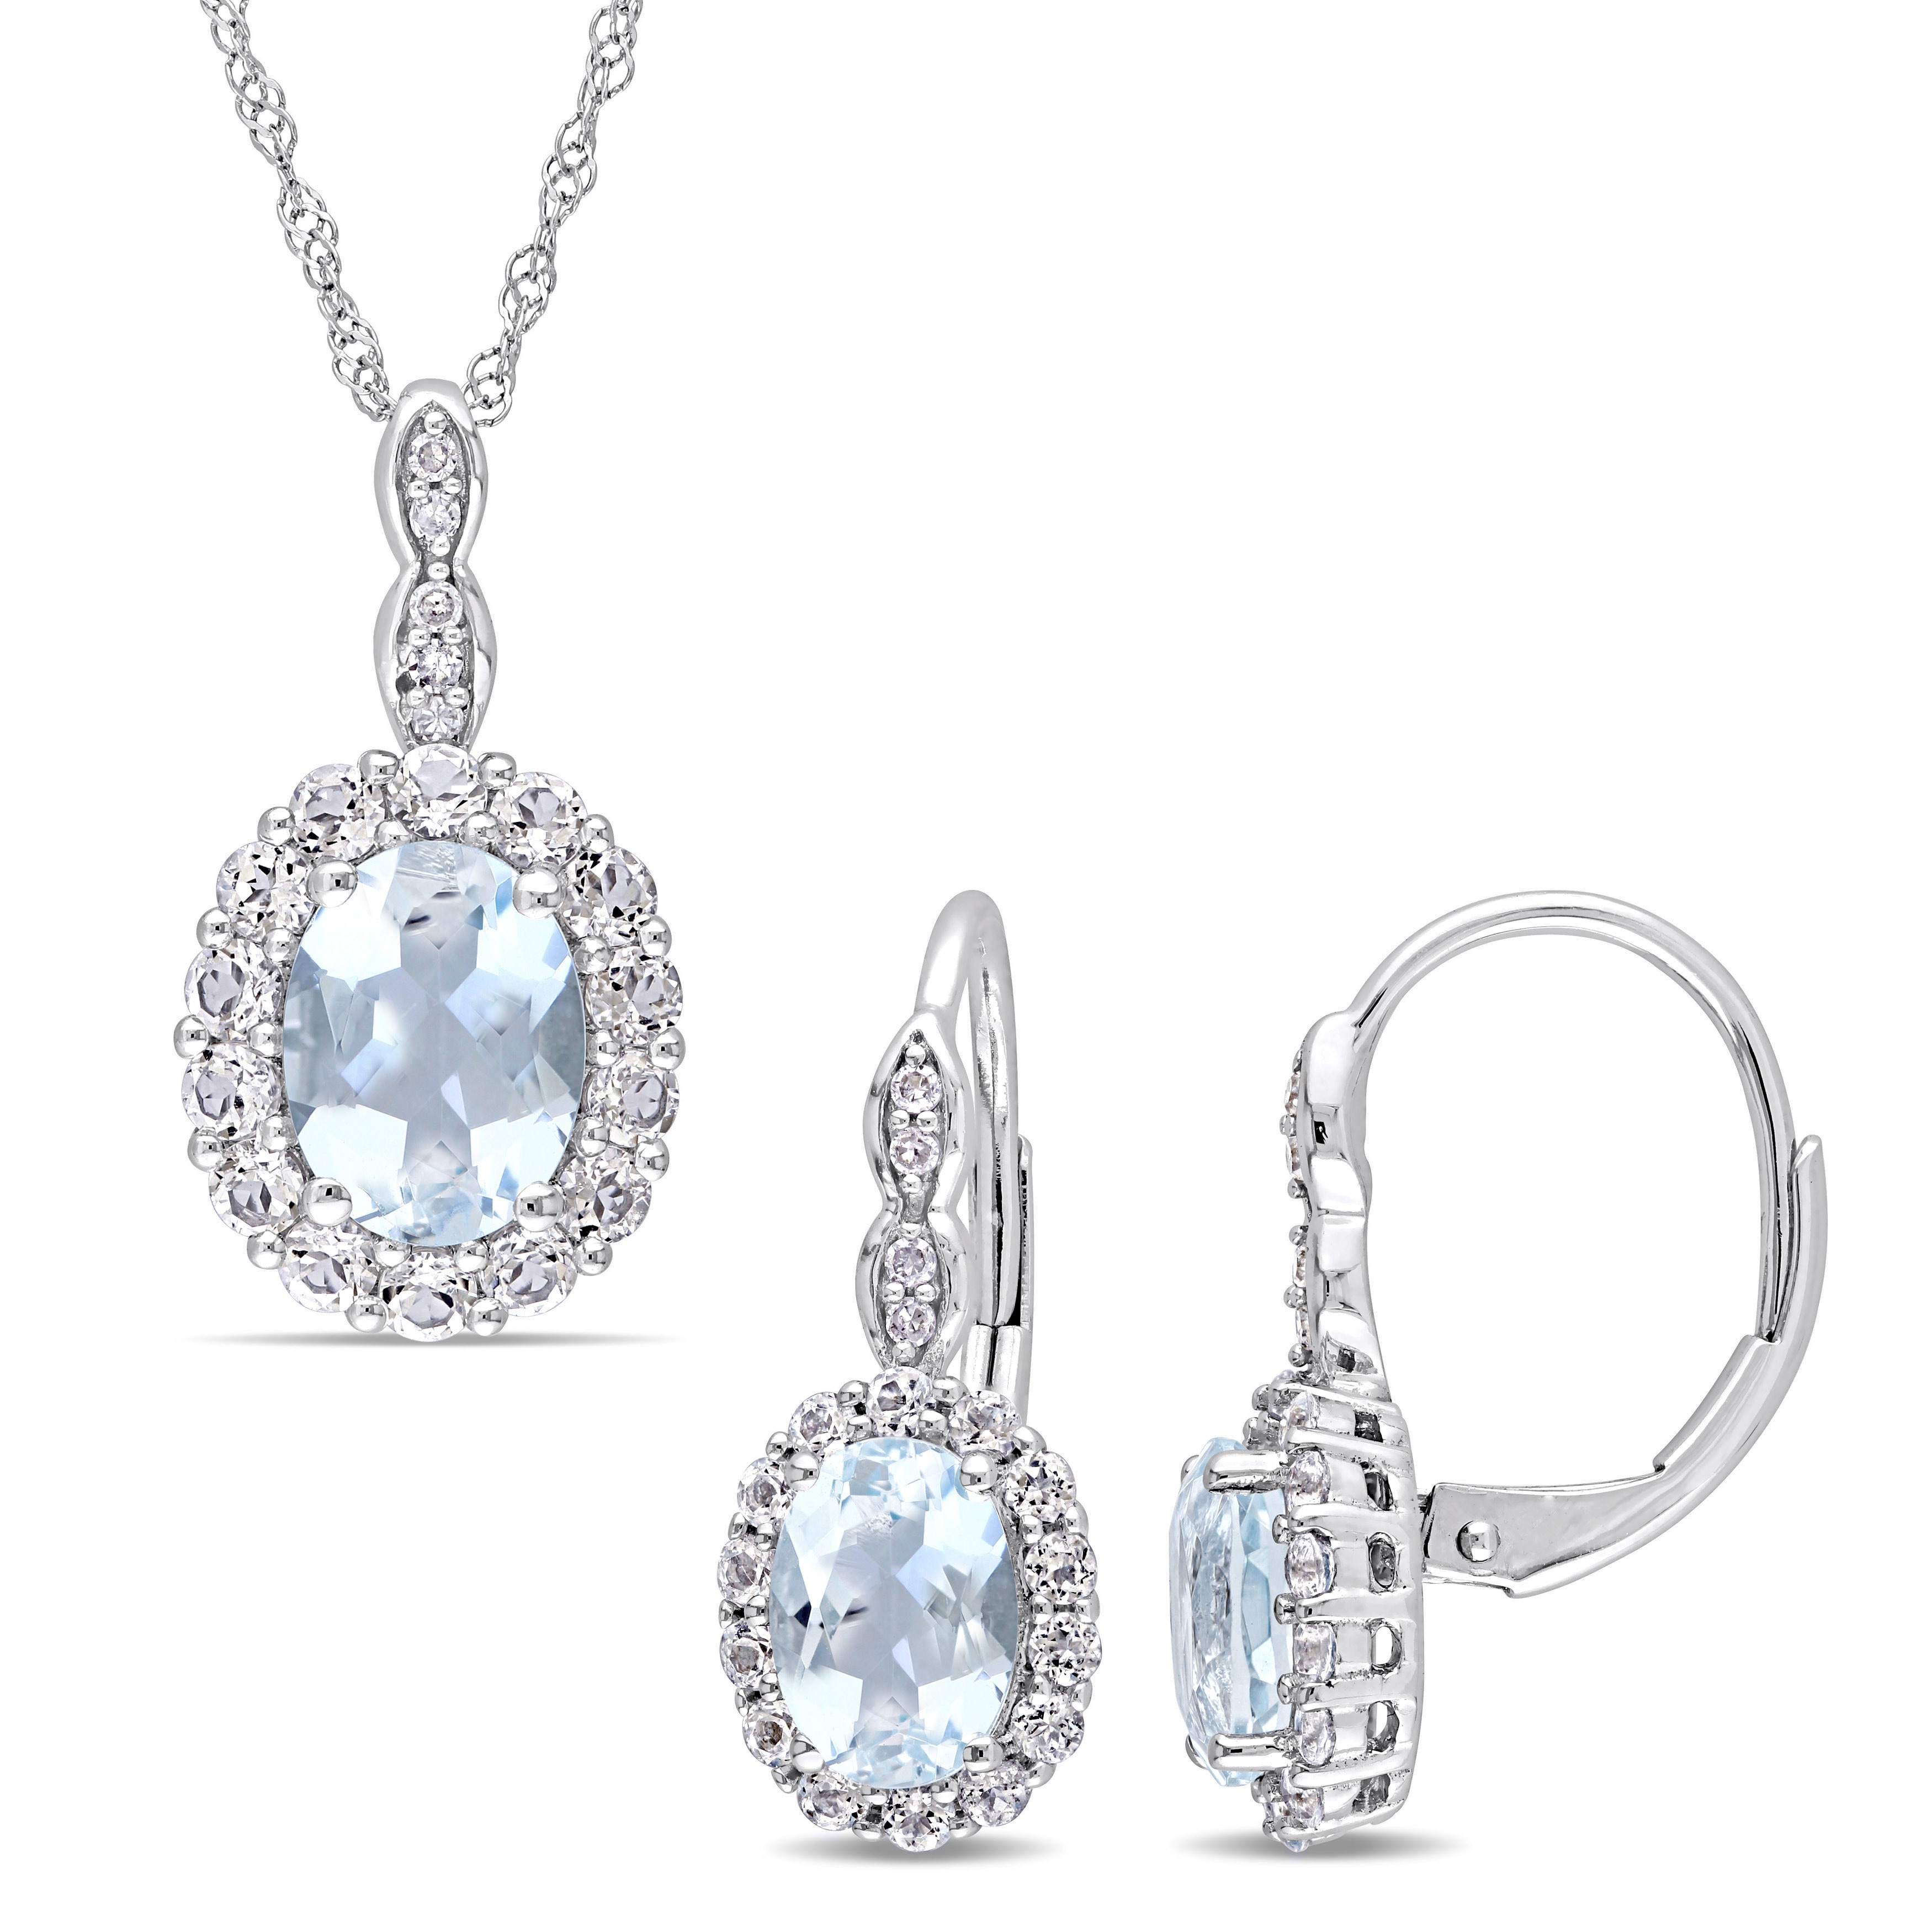 ALARRI 0.46 Carat 14K Solid White Gold Another Victory Aquamarine Diamond Necklace with 18 Inch Chain Length 